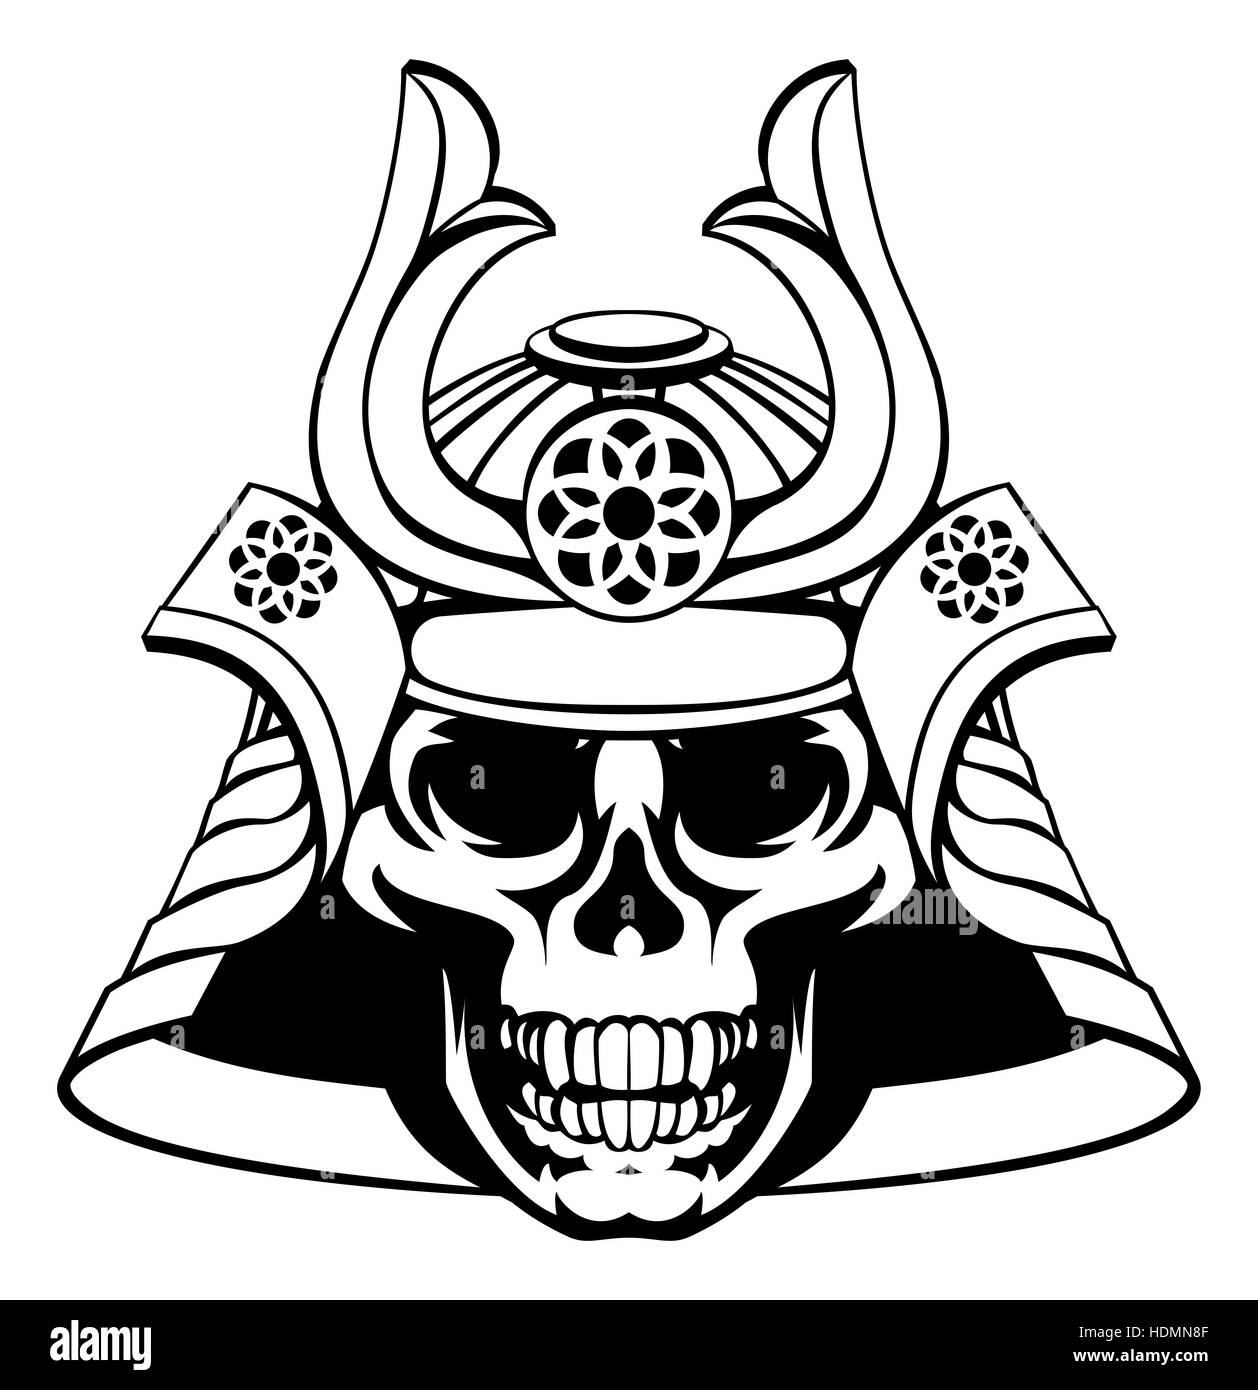 Skull samurai with mask and helmet with a skeletal face Stock Photo